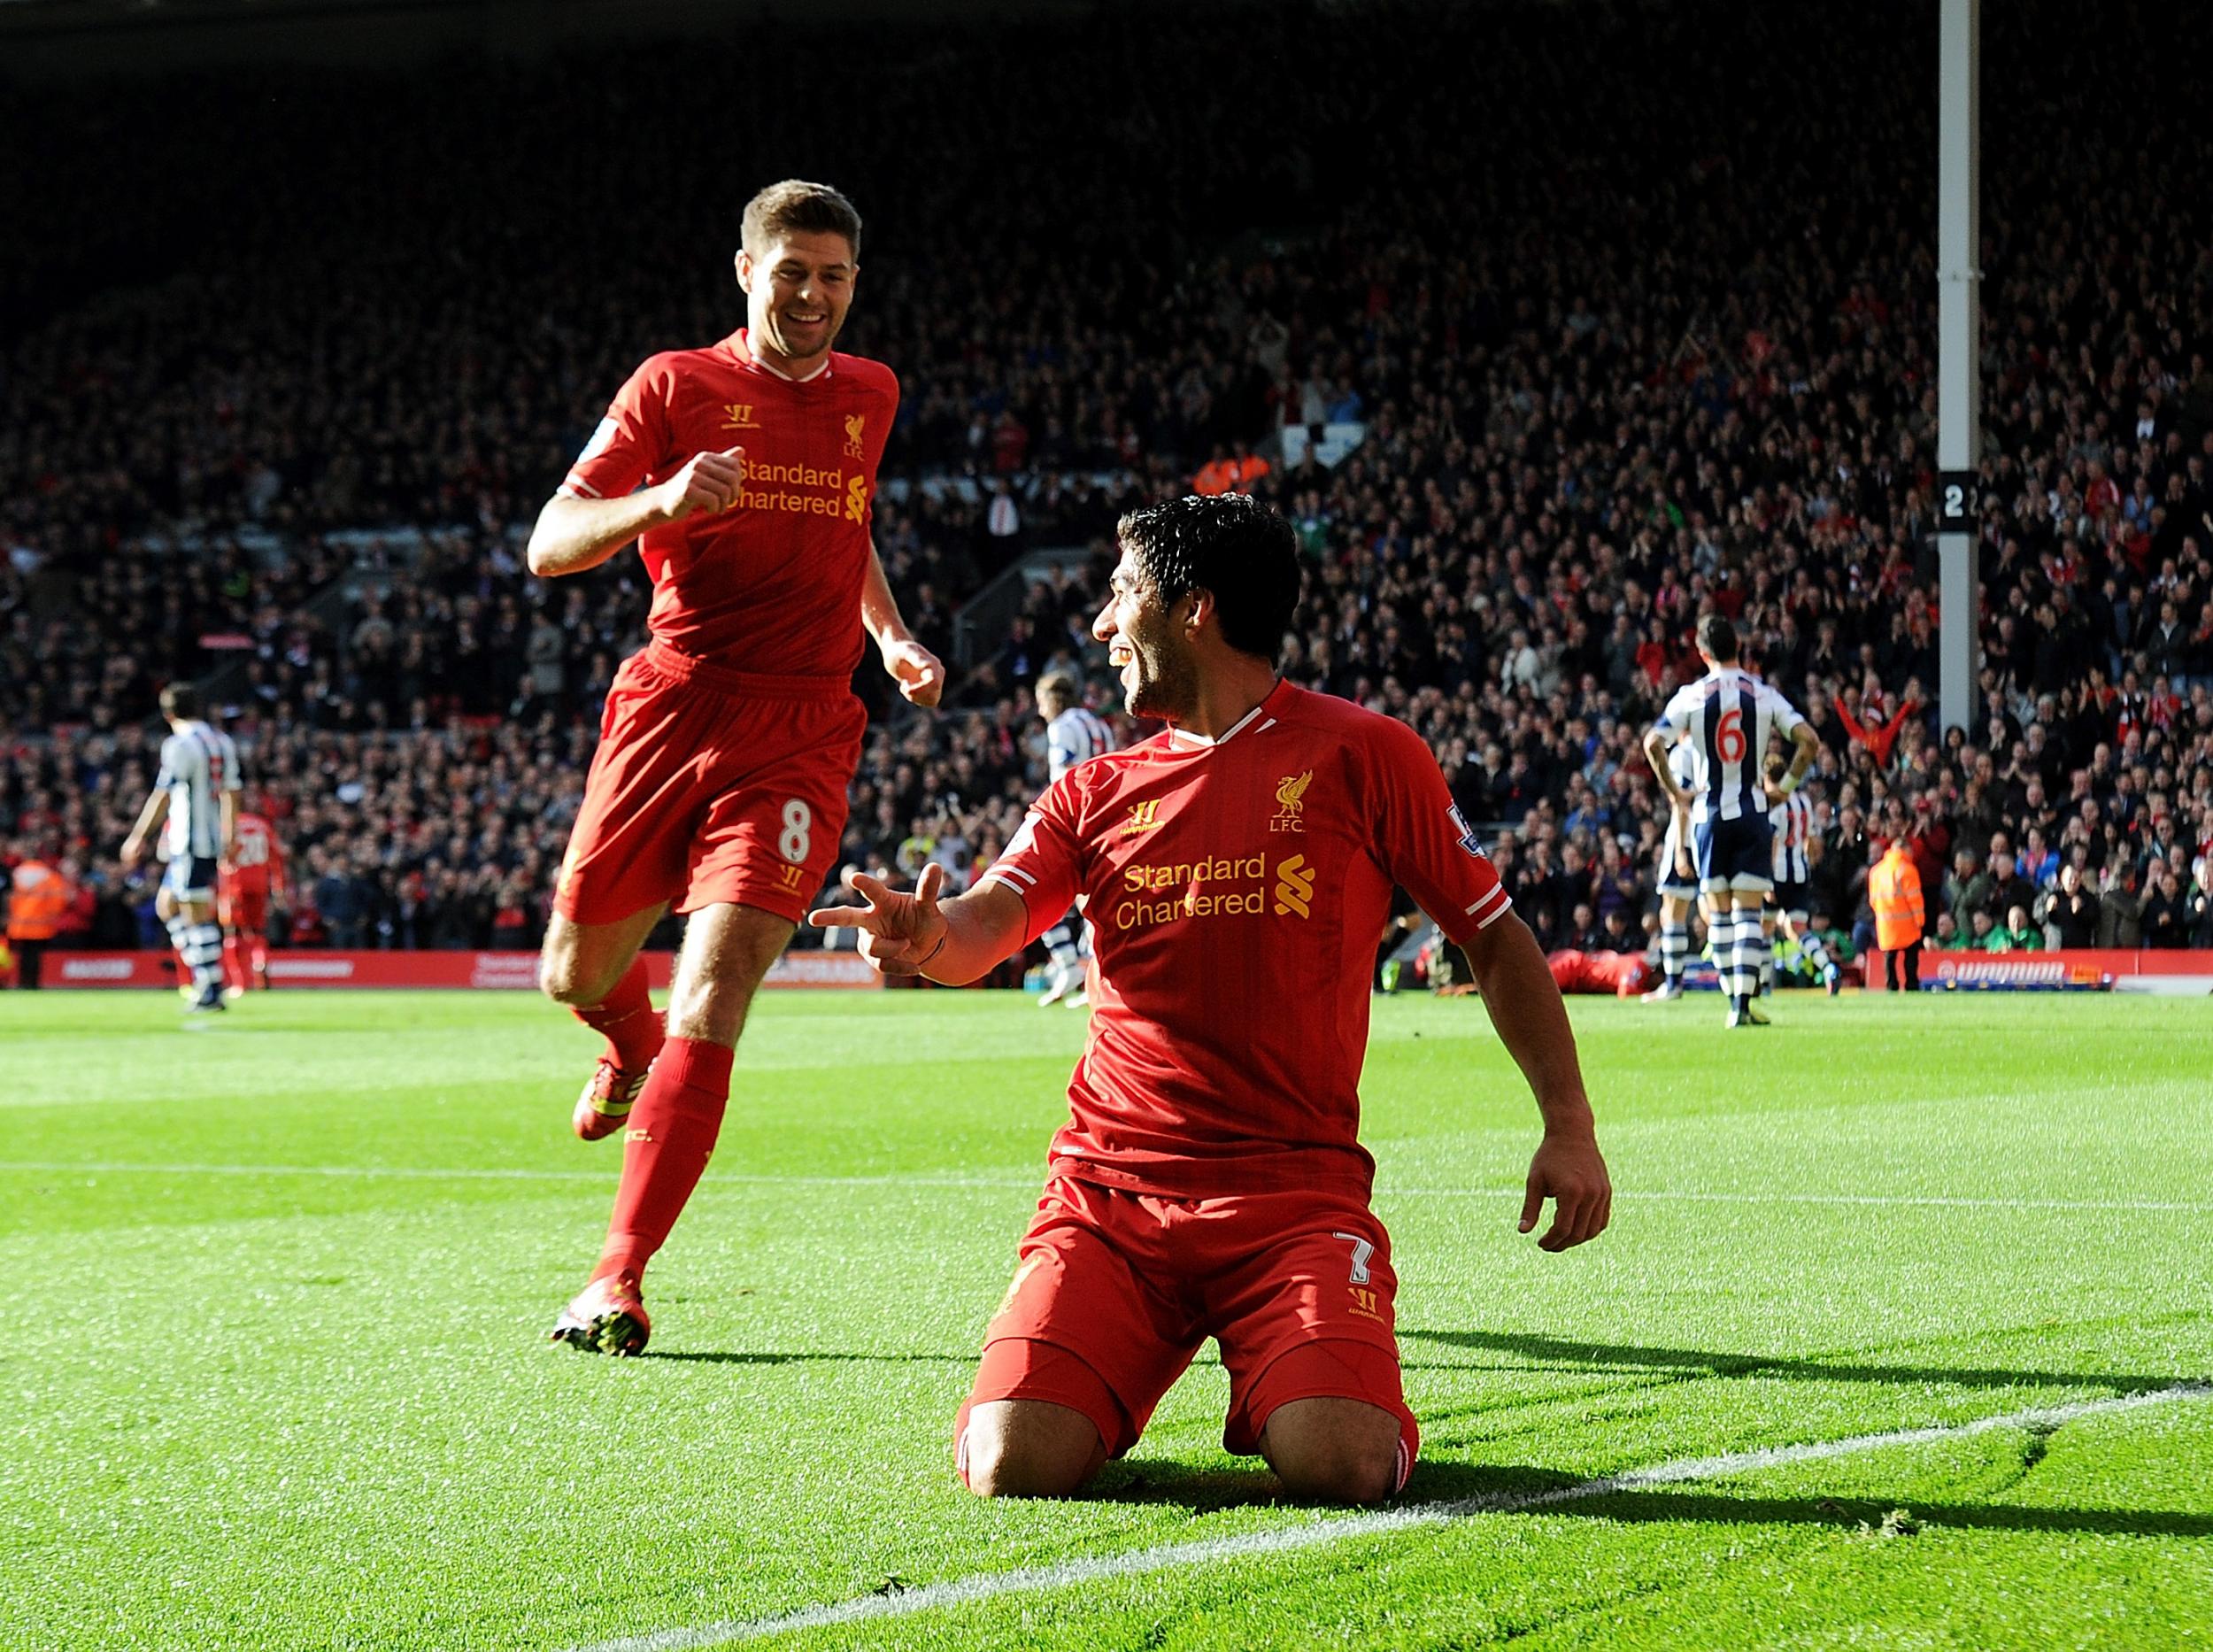 Gerrard and Suarez played key parts in Liverpool's last significant title challenge